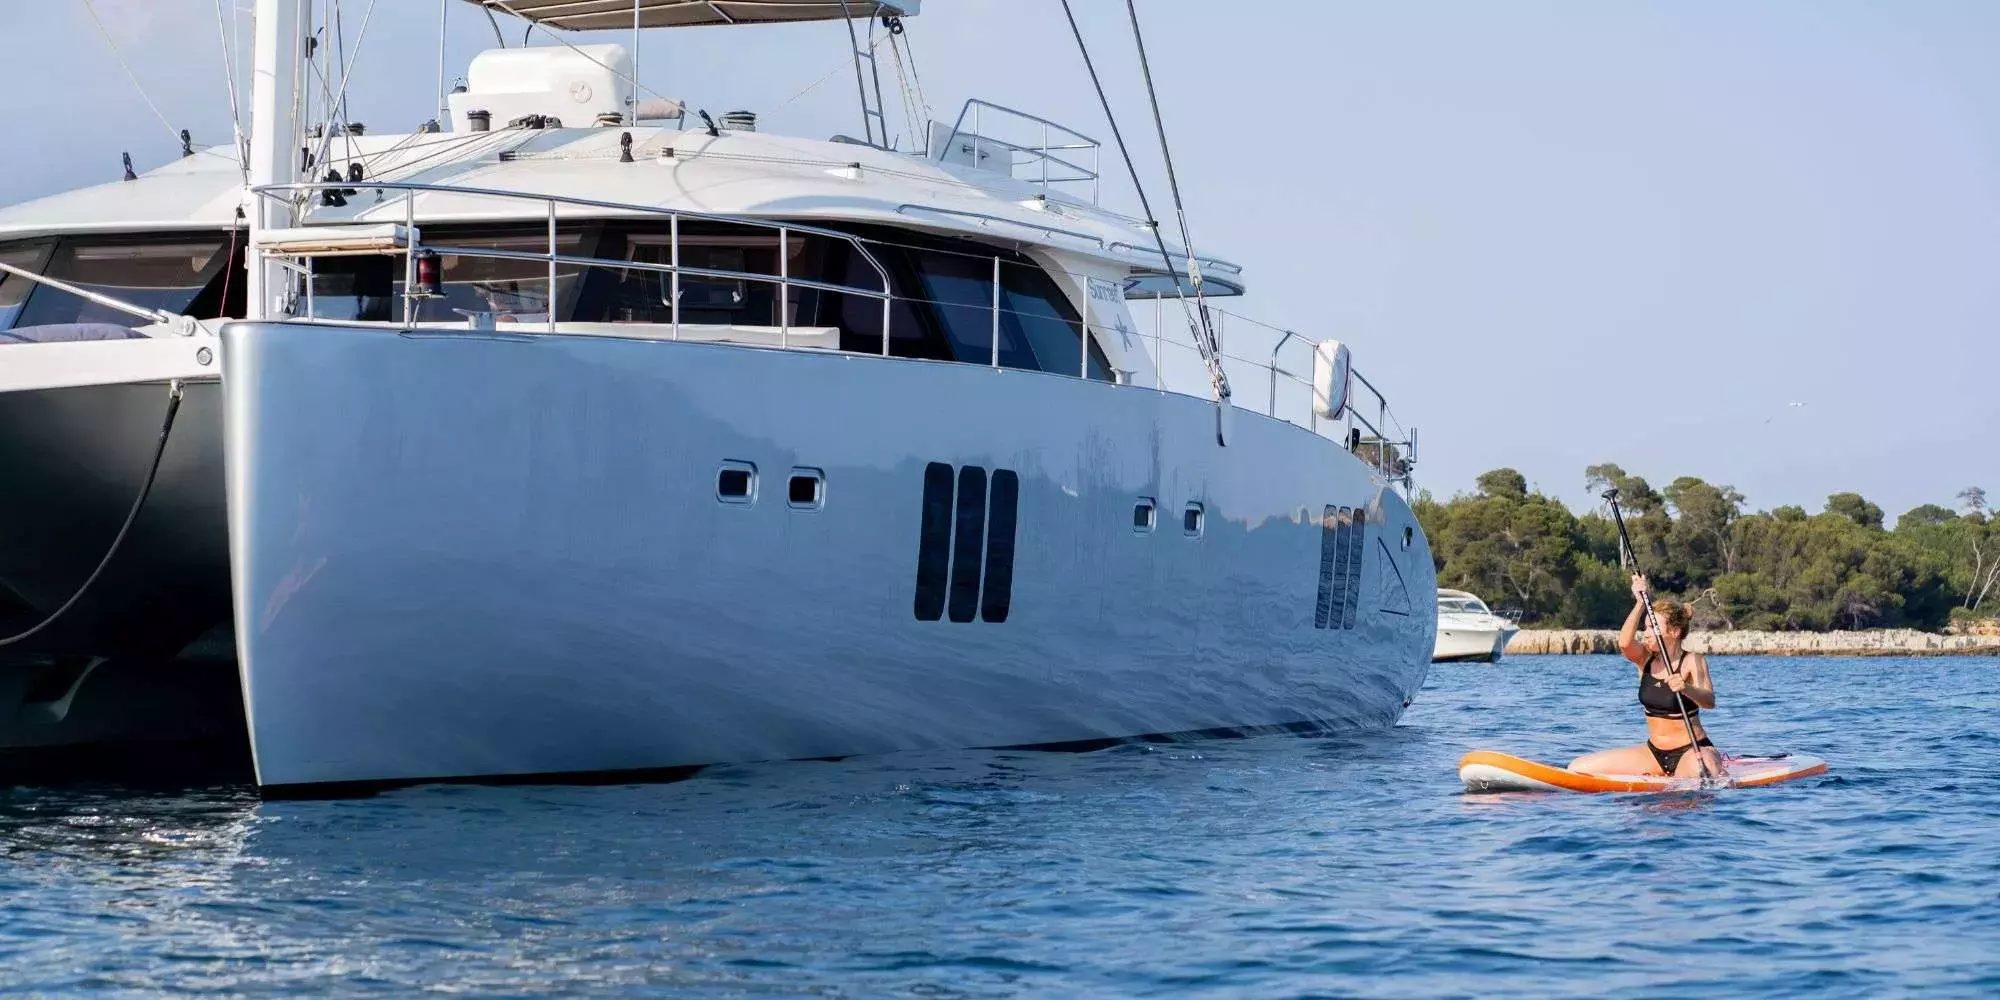 Seazen II by Sunreef Yachts - Special Offer for a private Luxury Catamaran Rental in St Tropez with a crew